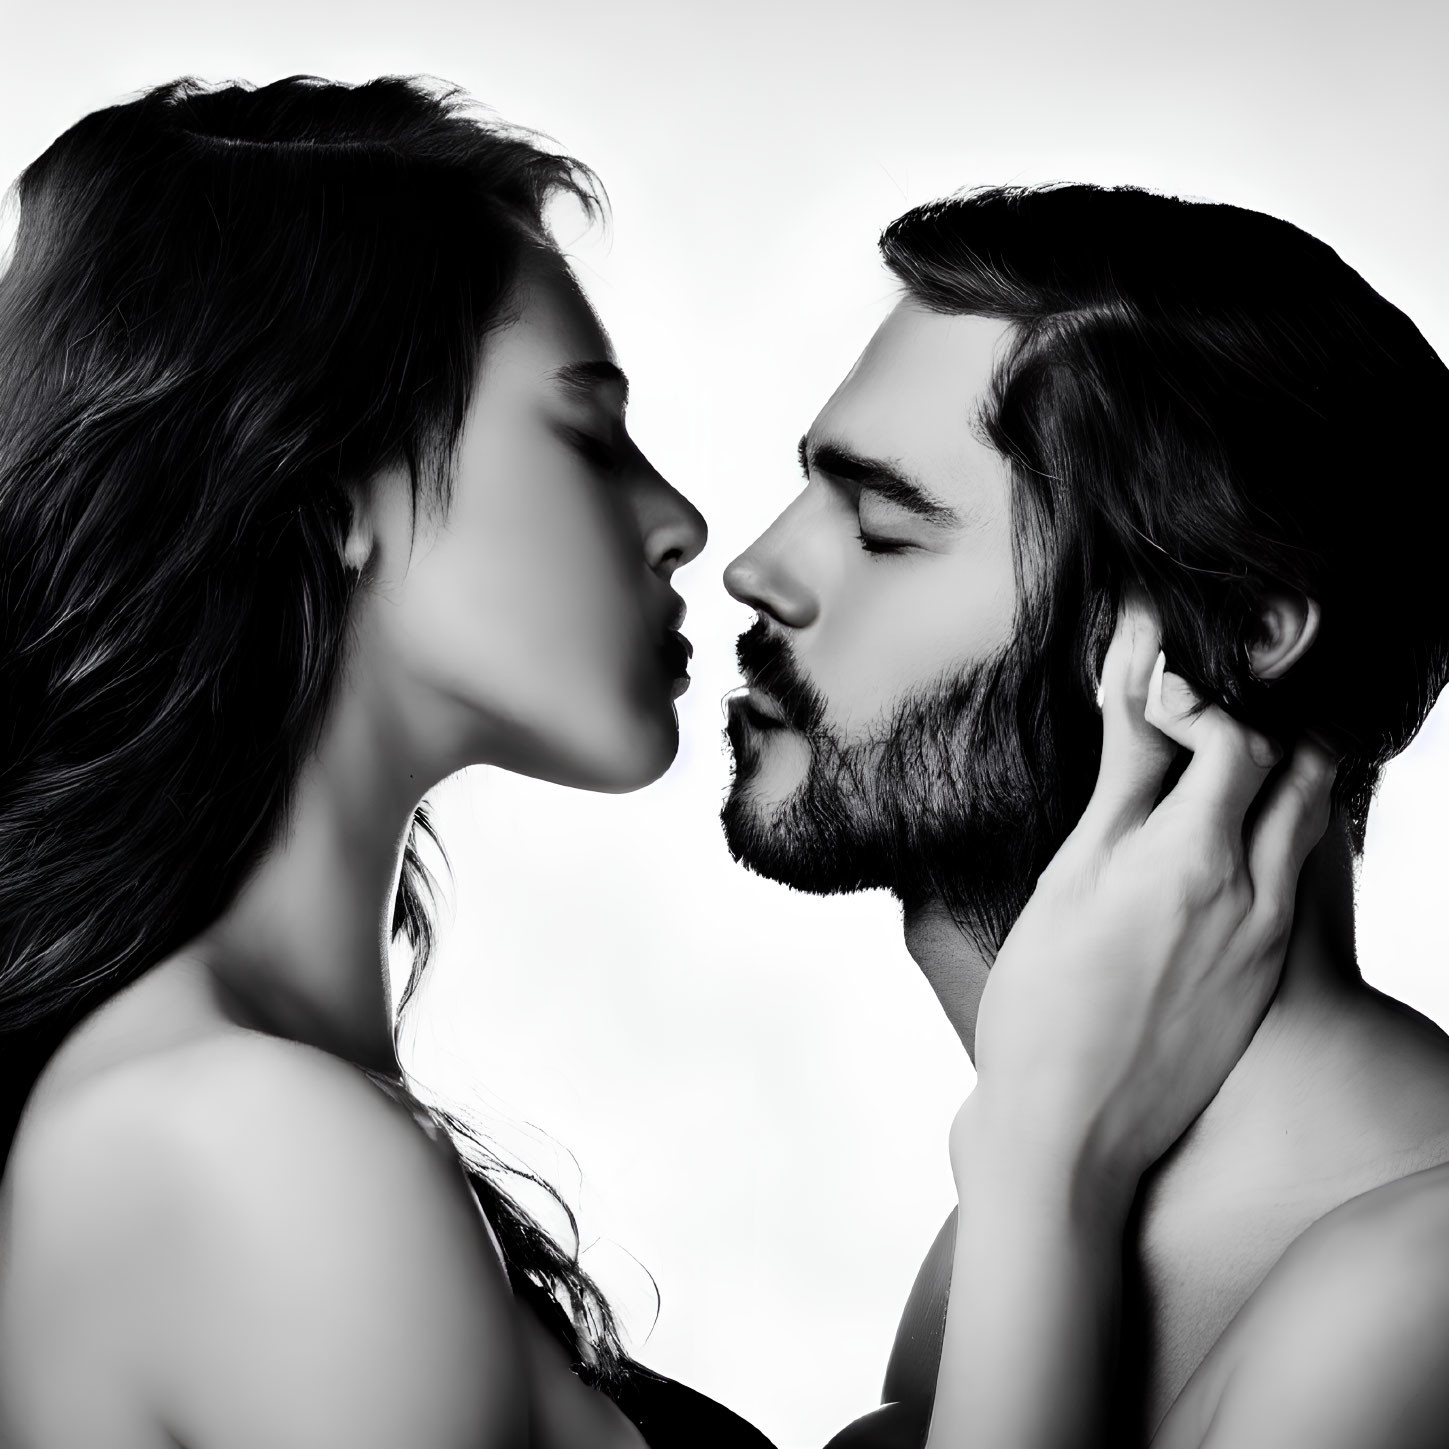 Man and woman in profile about to kiss on white background